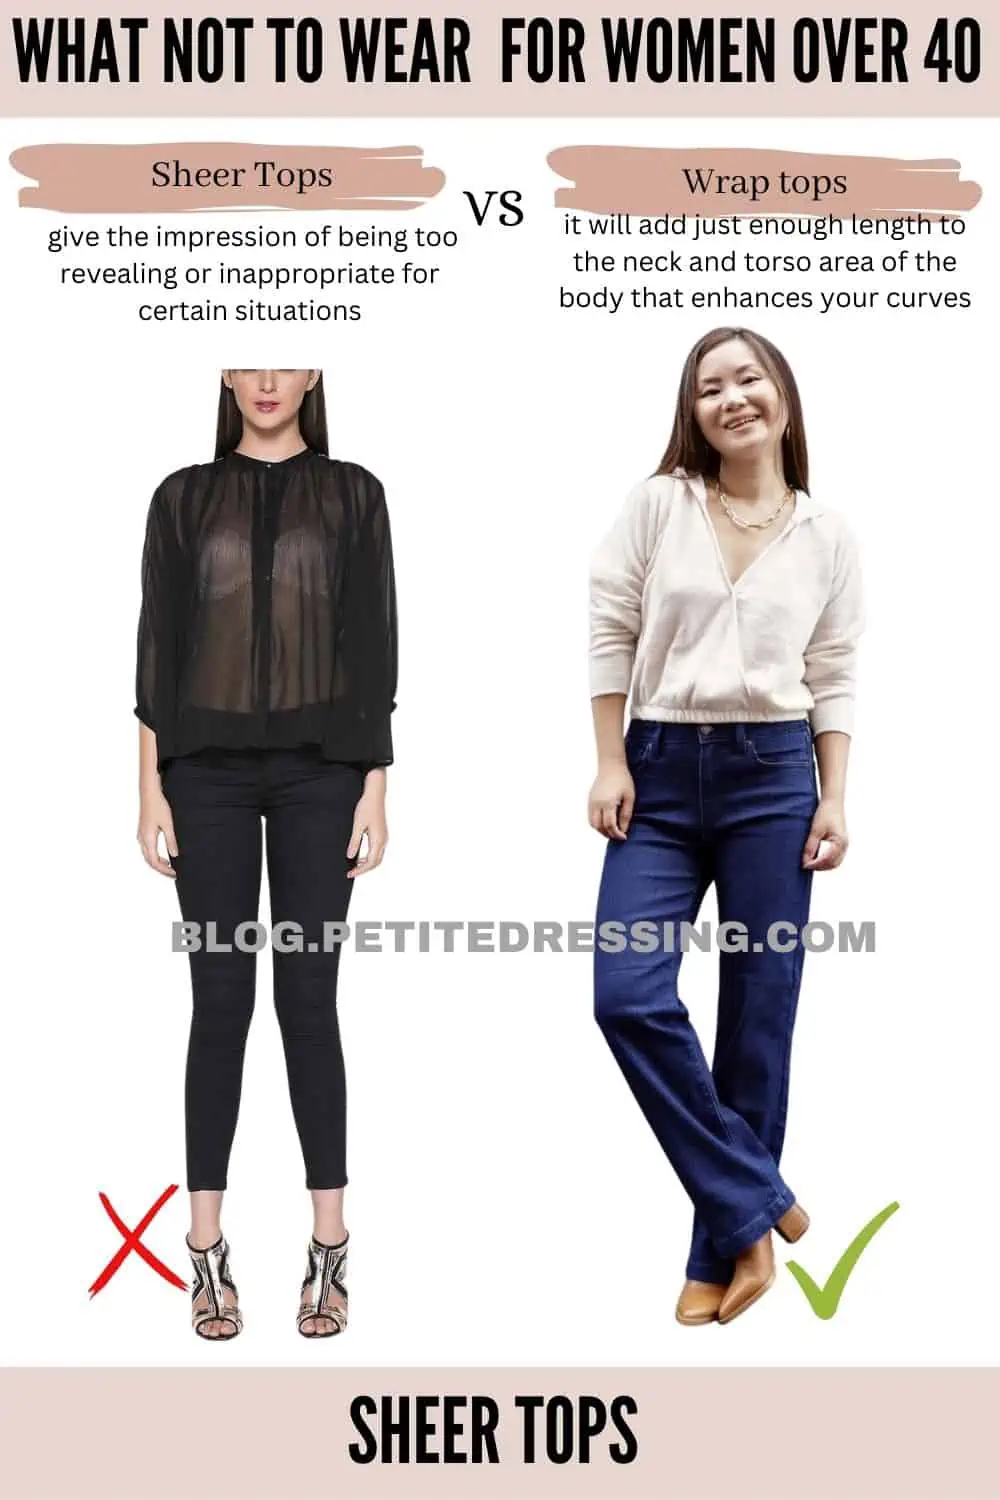 How To Wear Sheer Trend Over 40 Without Feeling Too Risqué